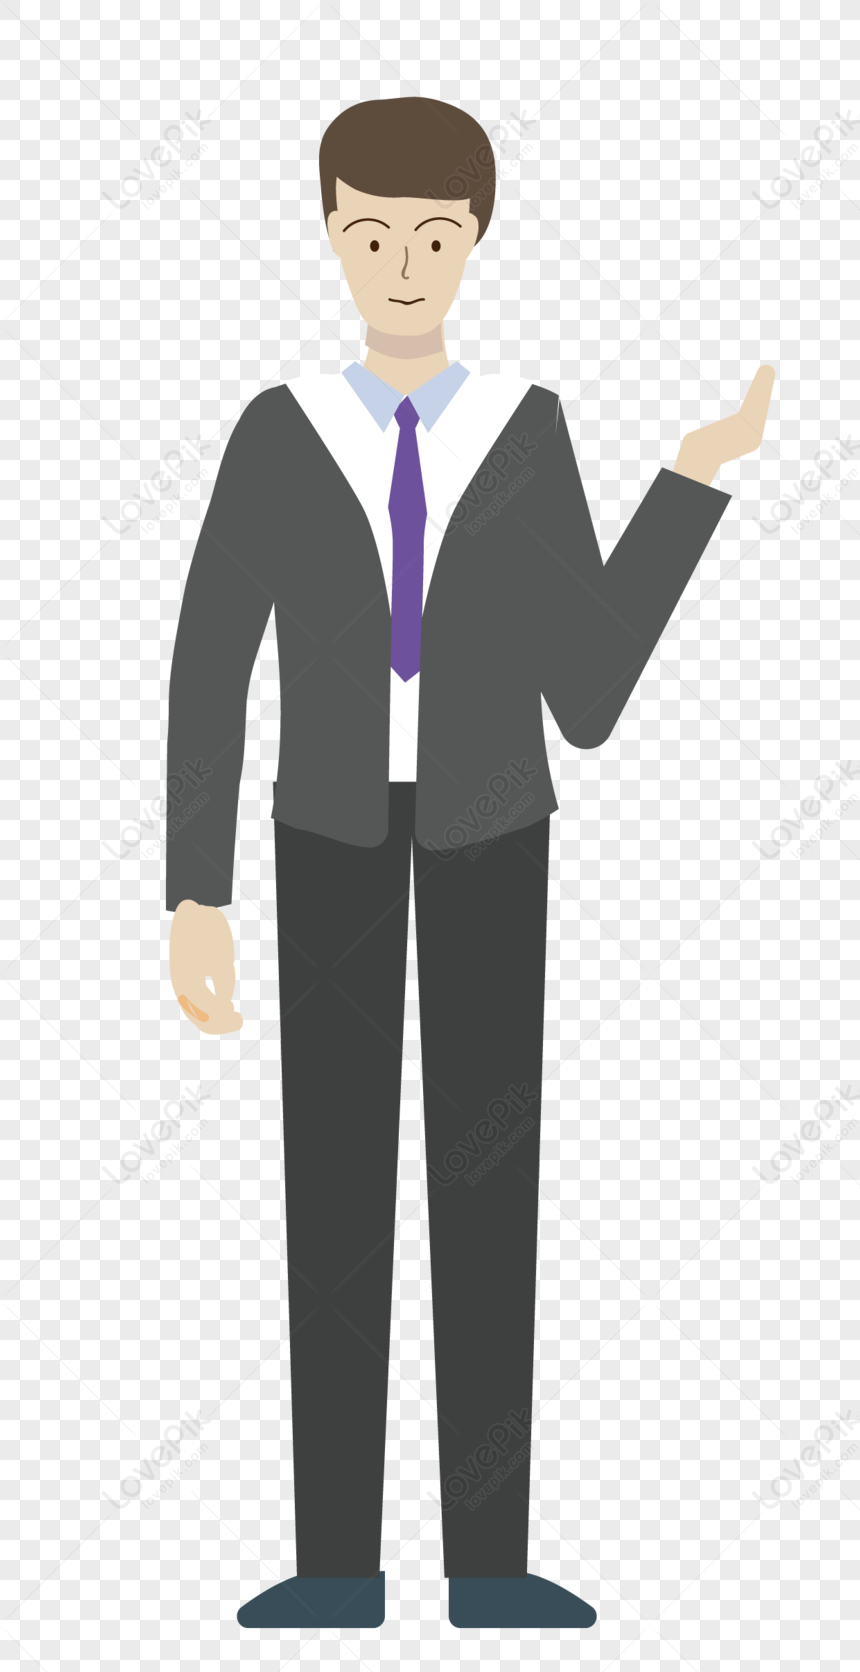 Business Personage PNG Picture And Clipart Image For Free Download ...